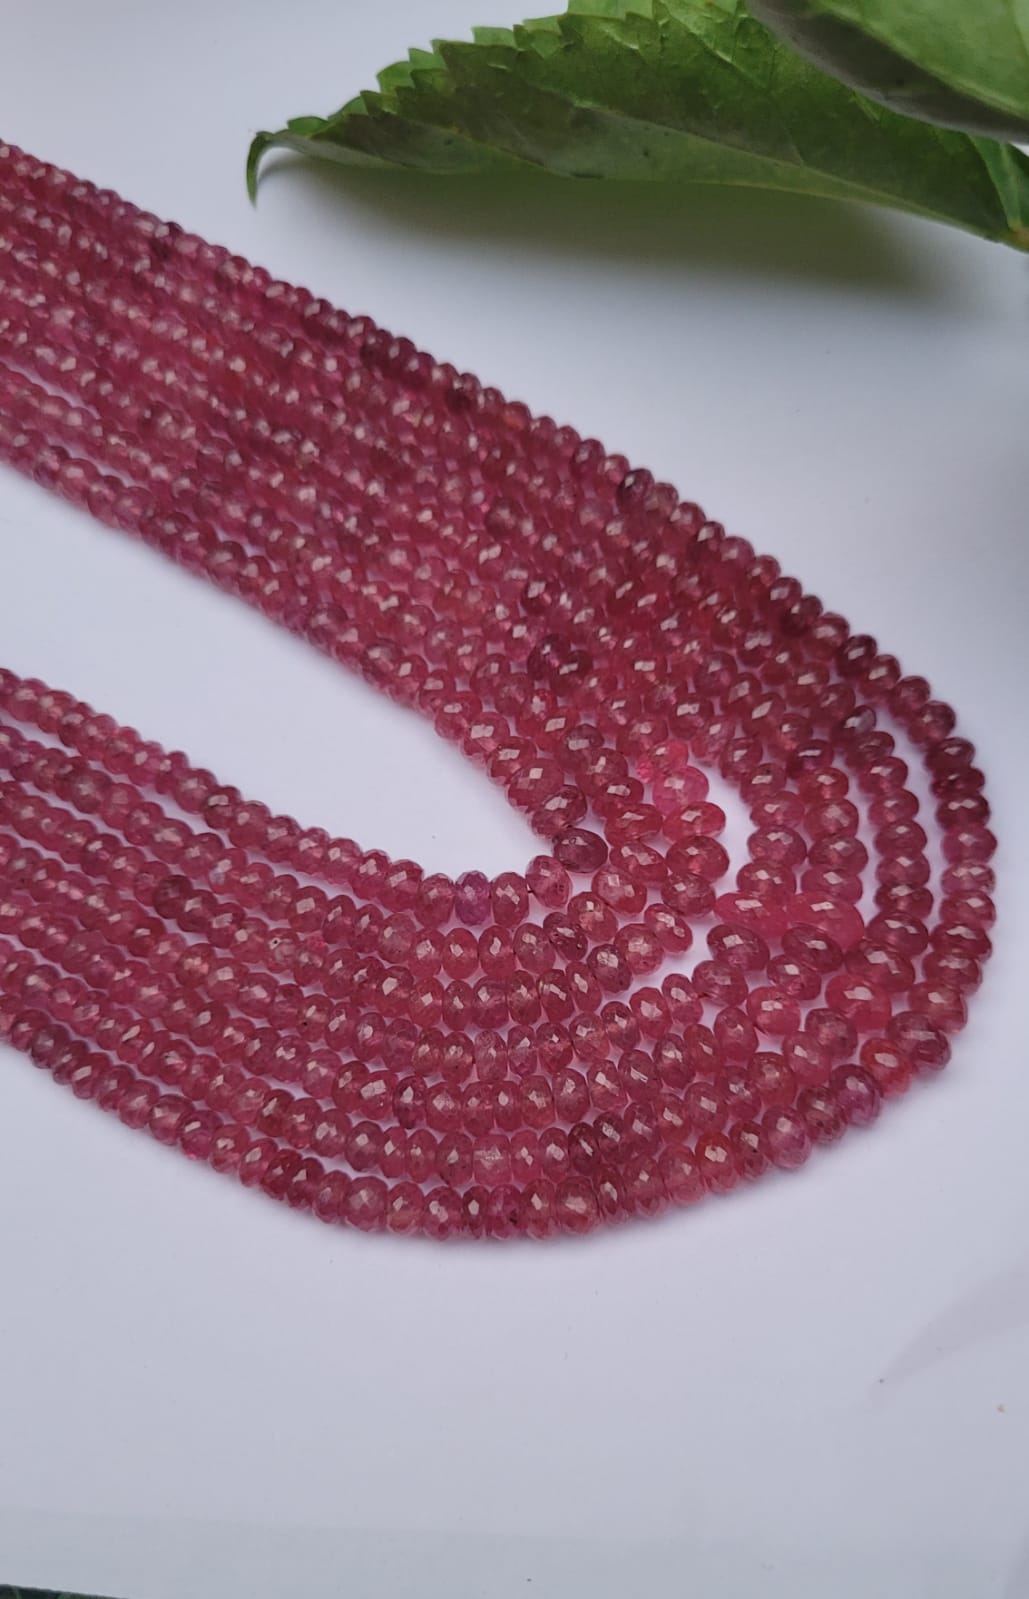 Precious Pink Ruby Multiline 7 layered necklace